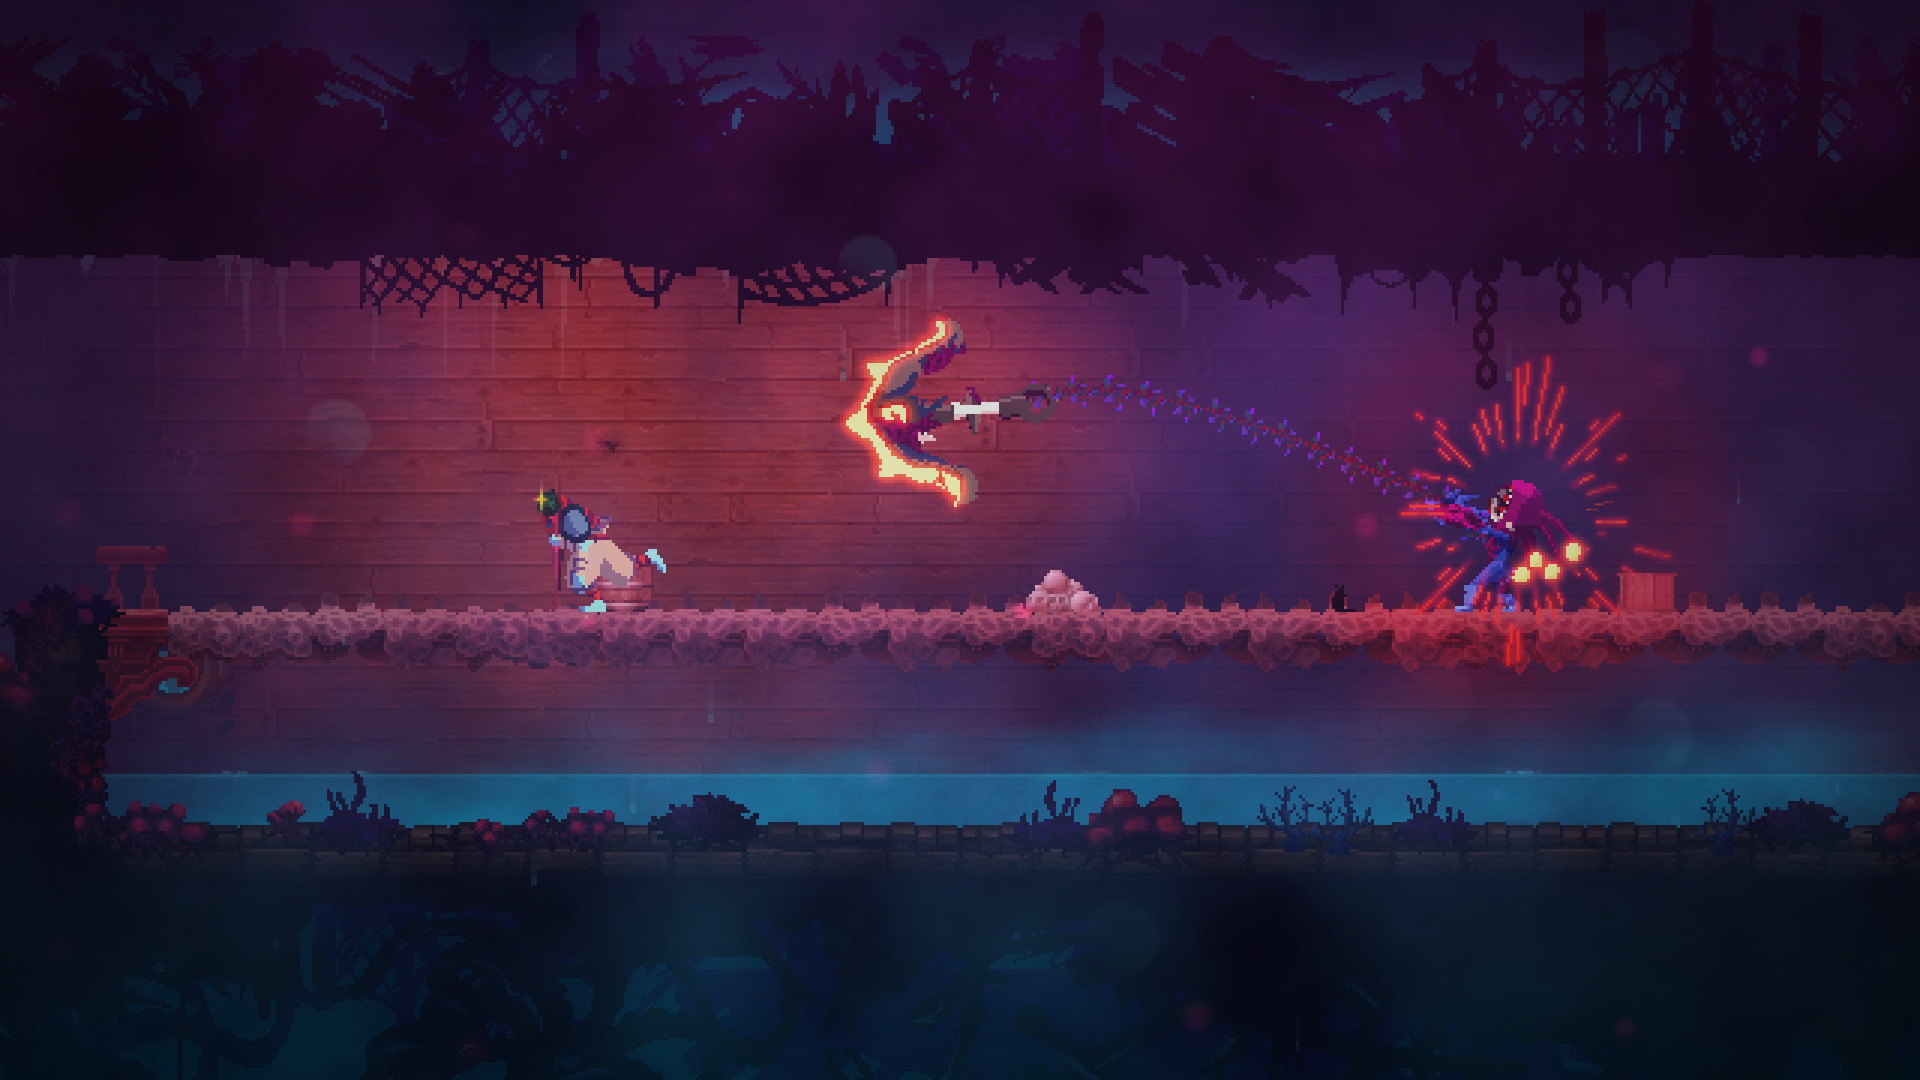 Dead Cells: The Queen and the Sea - screenshot 4